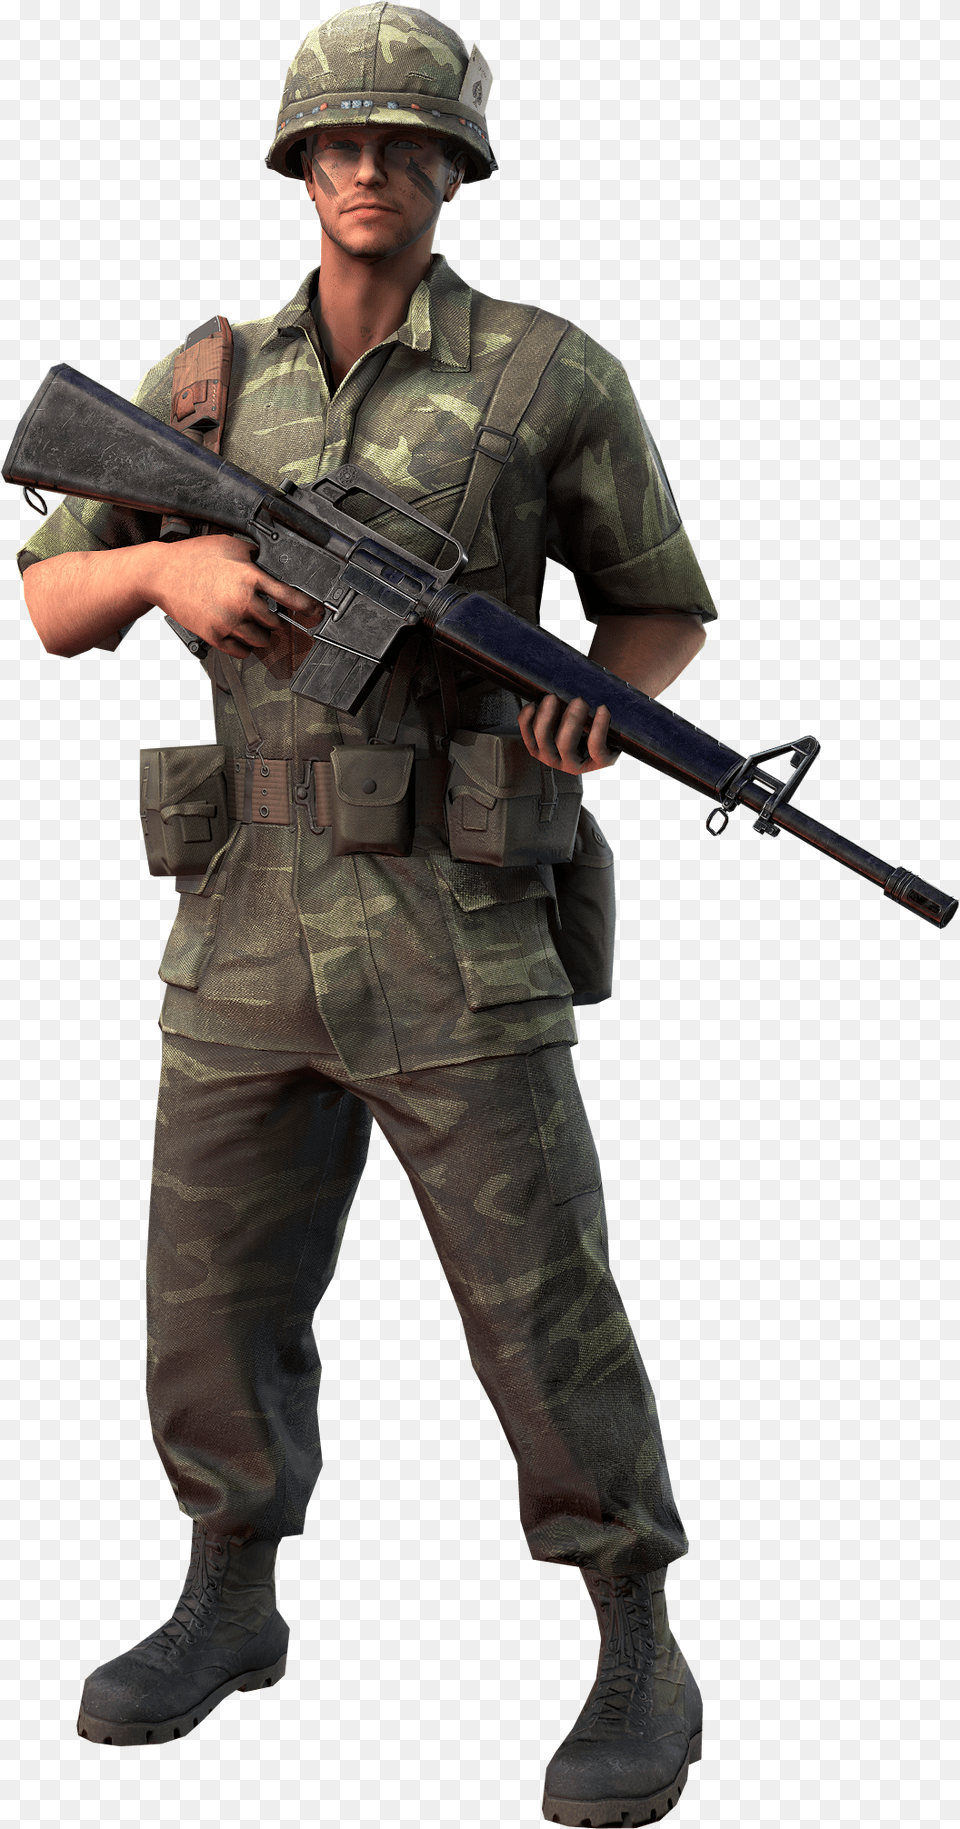 Sniper, Military Uniform, Military, Weapon, Soldier Free Png Download